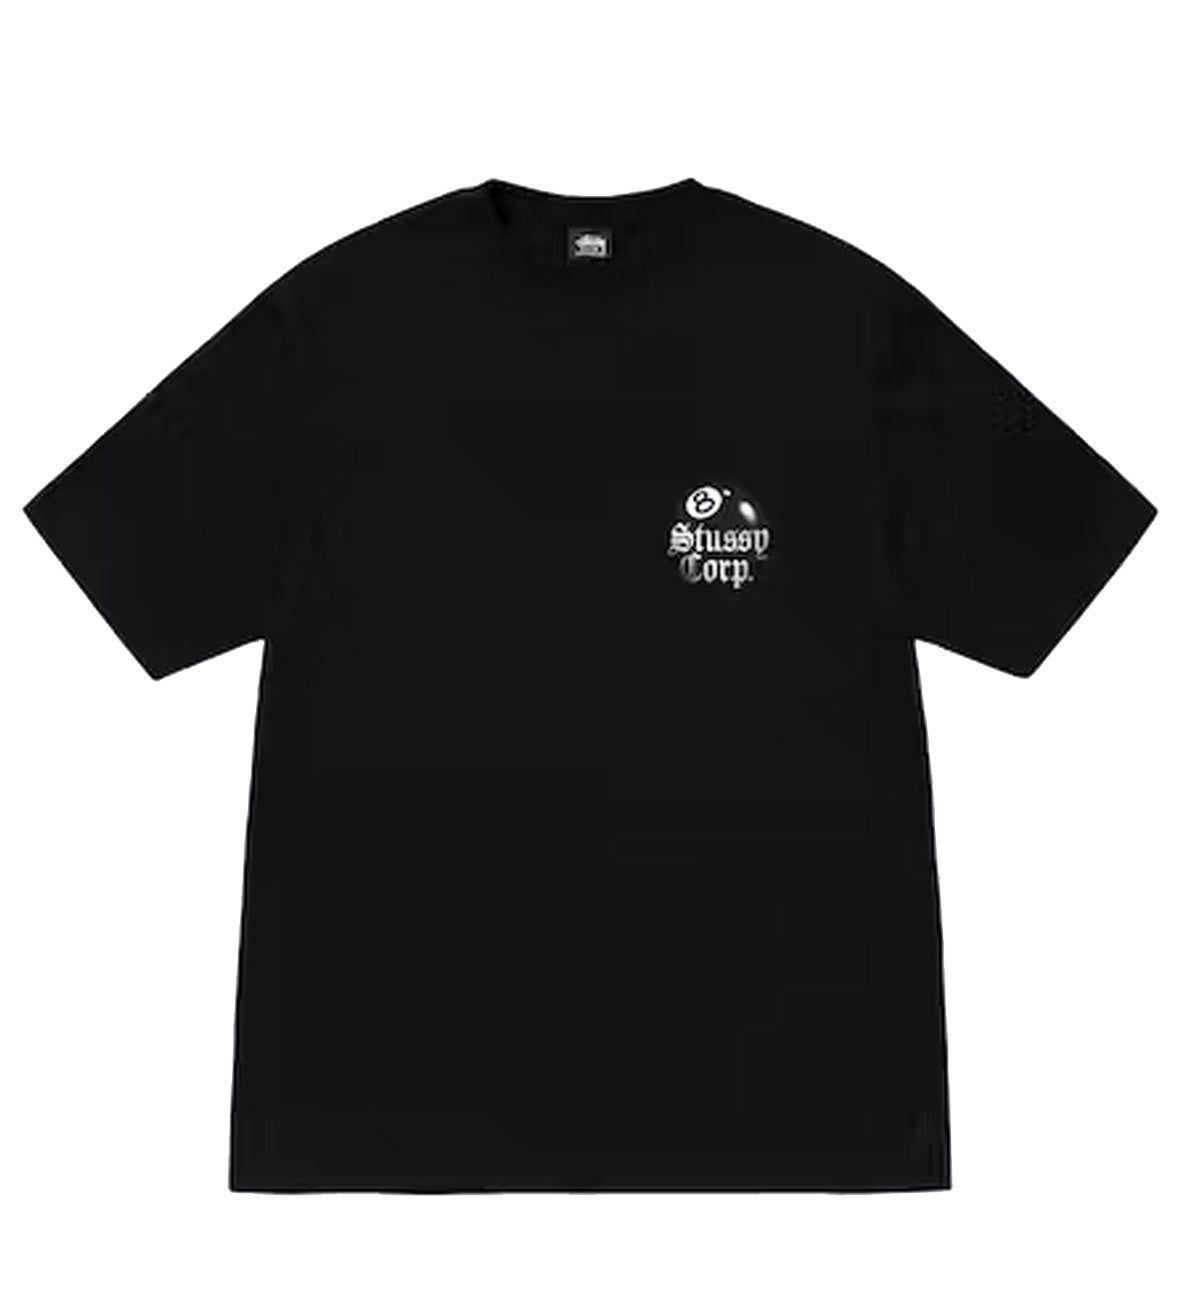 Stussy 8 Ball Corp Tee (Black) – The Factory KL